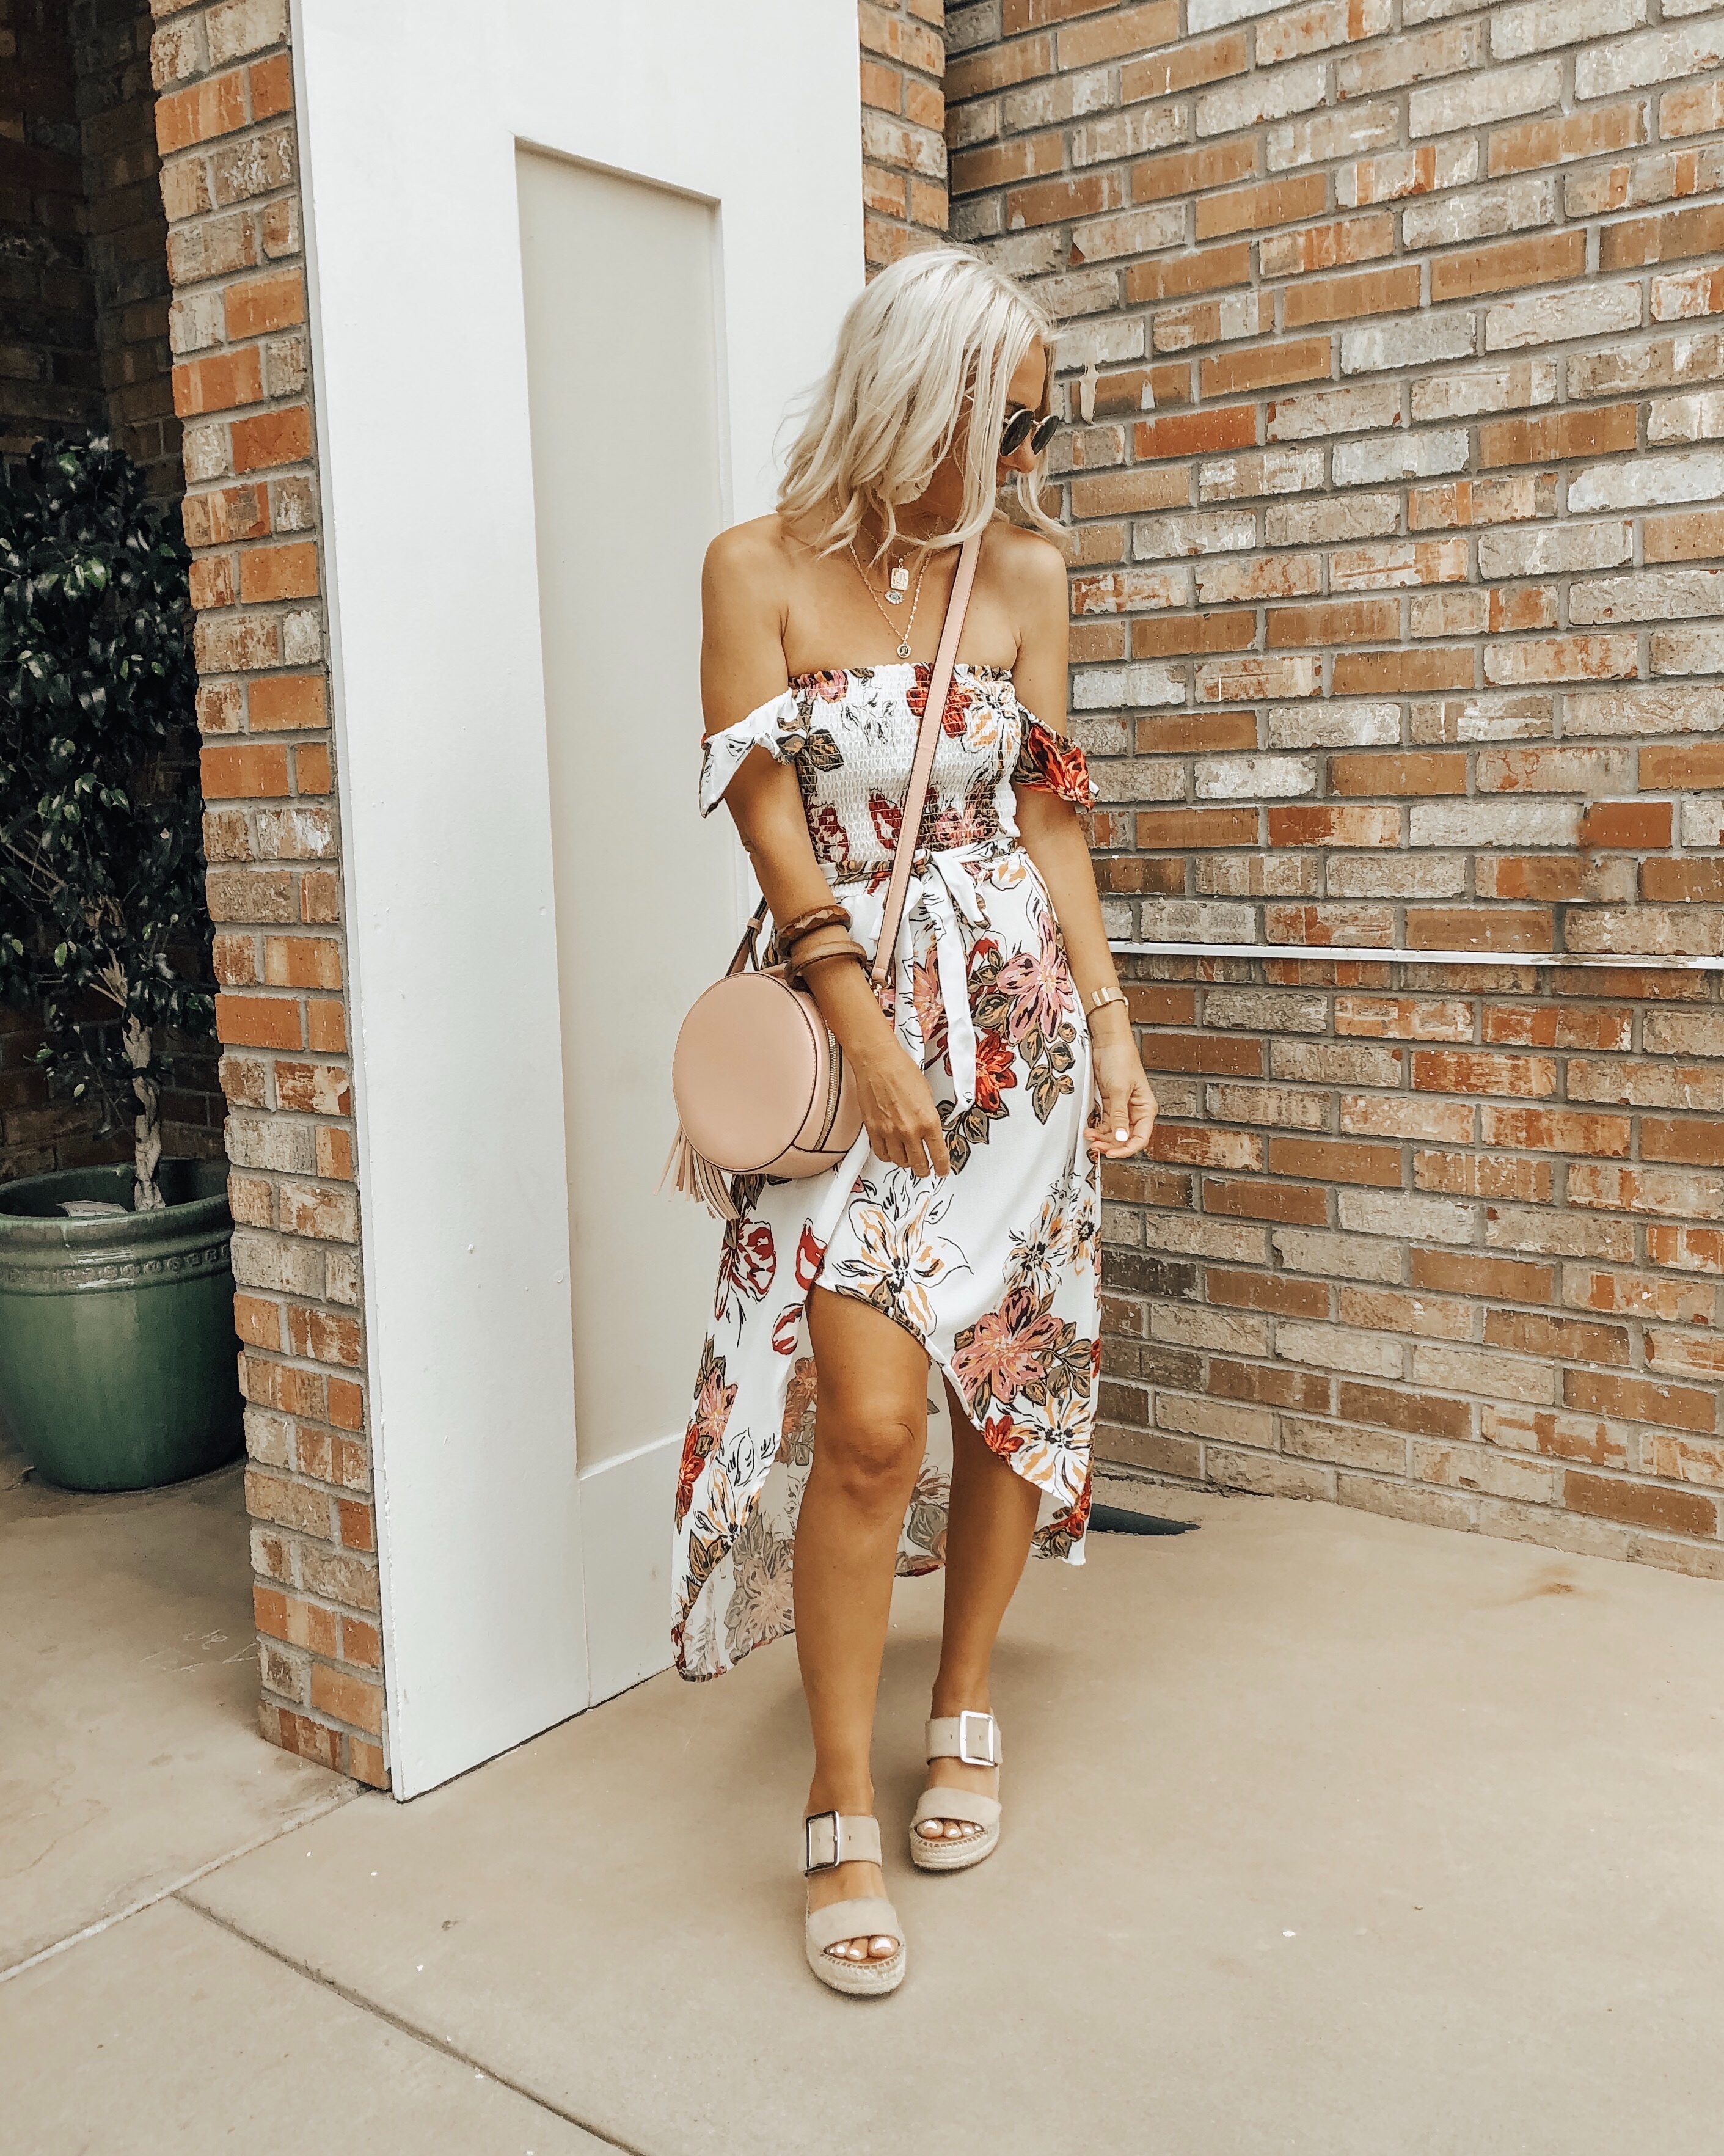 SUMMER DRESSES UNDER $40 FROM WALMART- Jaclyn De Leon Style + Summer is officially here and if you haven't stocked up on Summer dresses nows the time. Sharing all the best affordable dresses to wear now